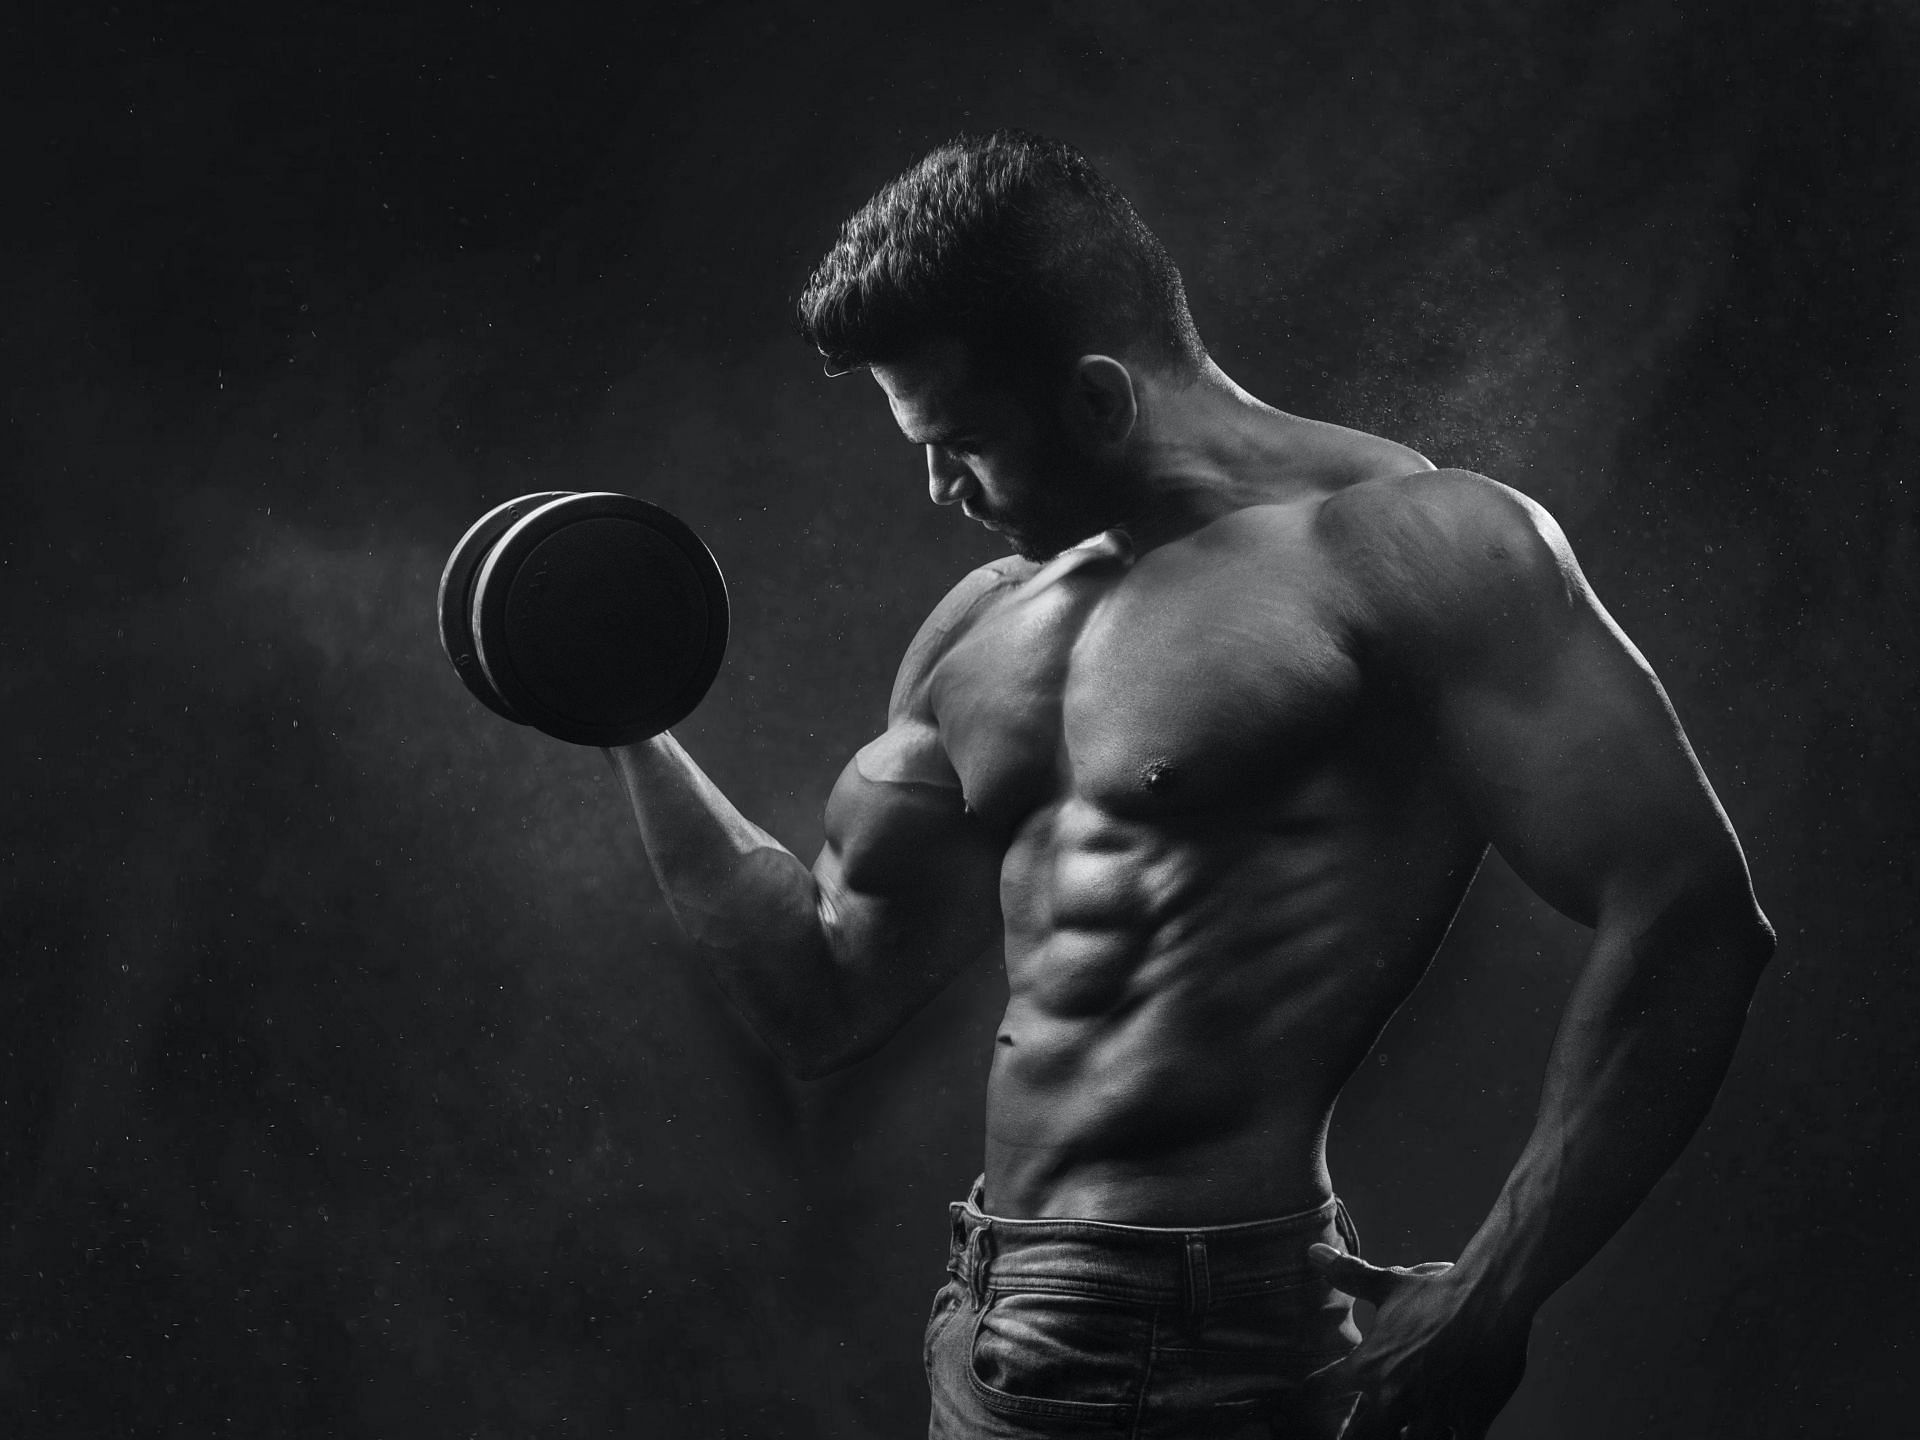 Arm exercises can help you build stronger, more muscly arms (Image via Pexels @Anush Gorak)